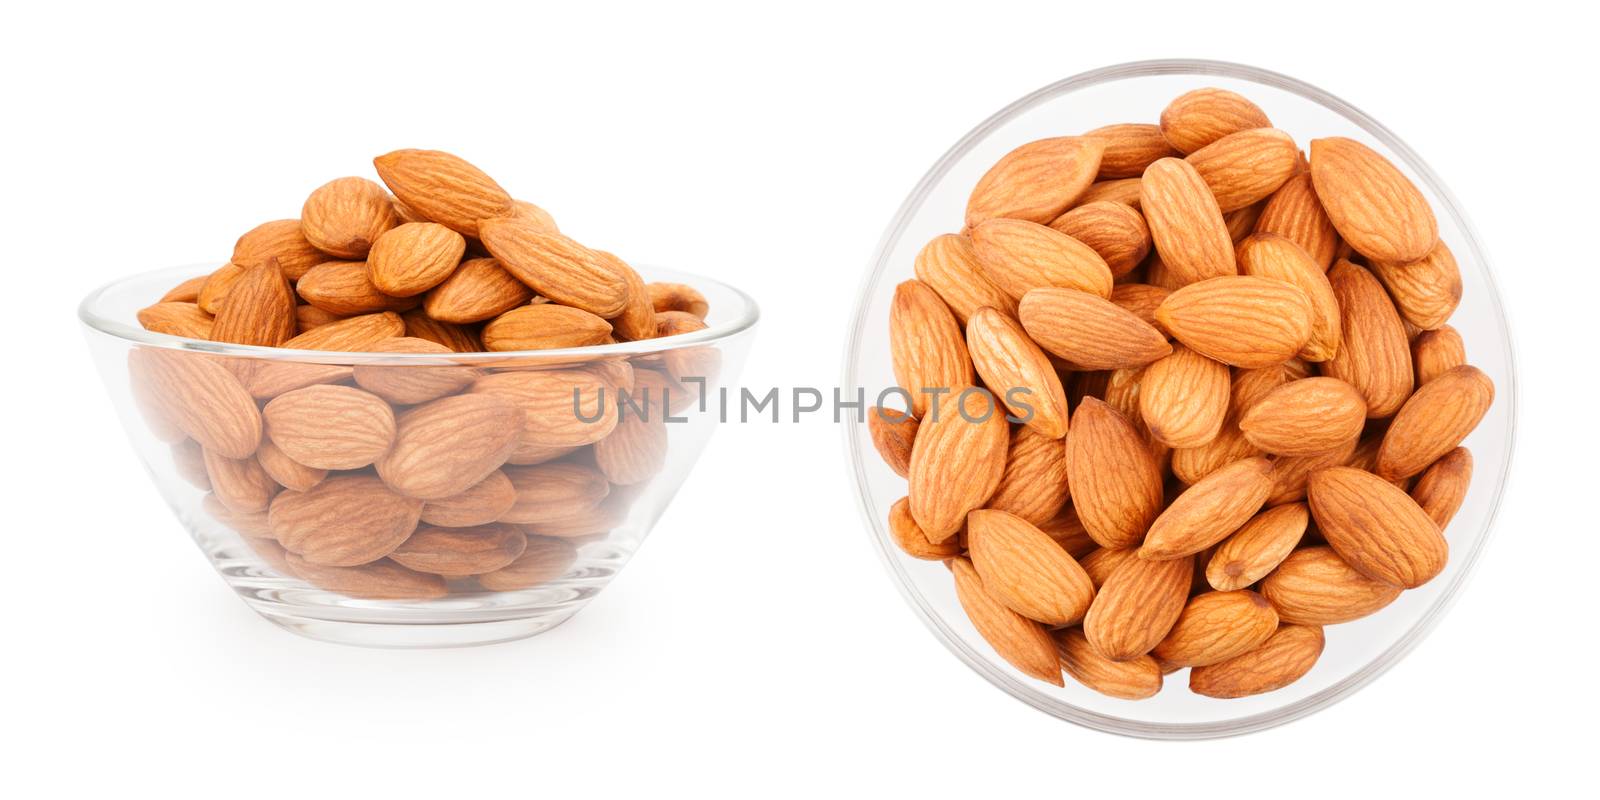 Dried almonds in a small glass bowl on white background, side and top view